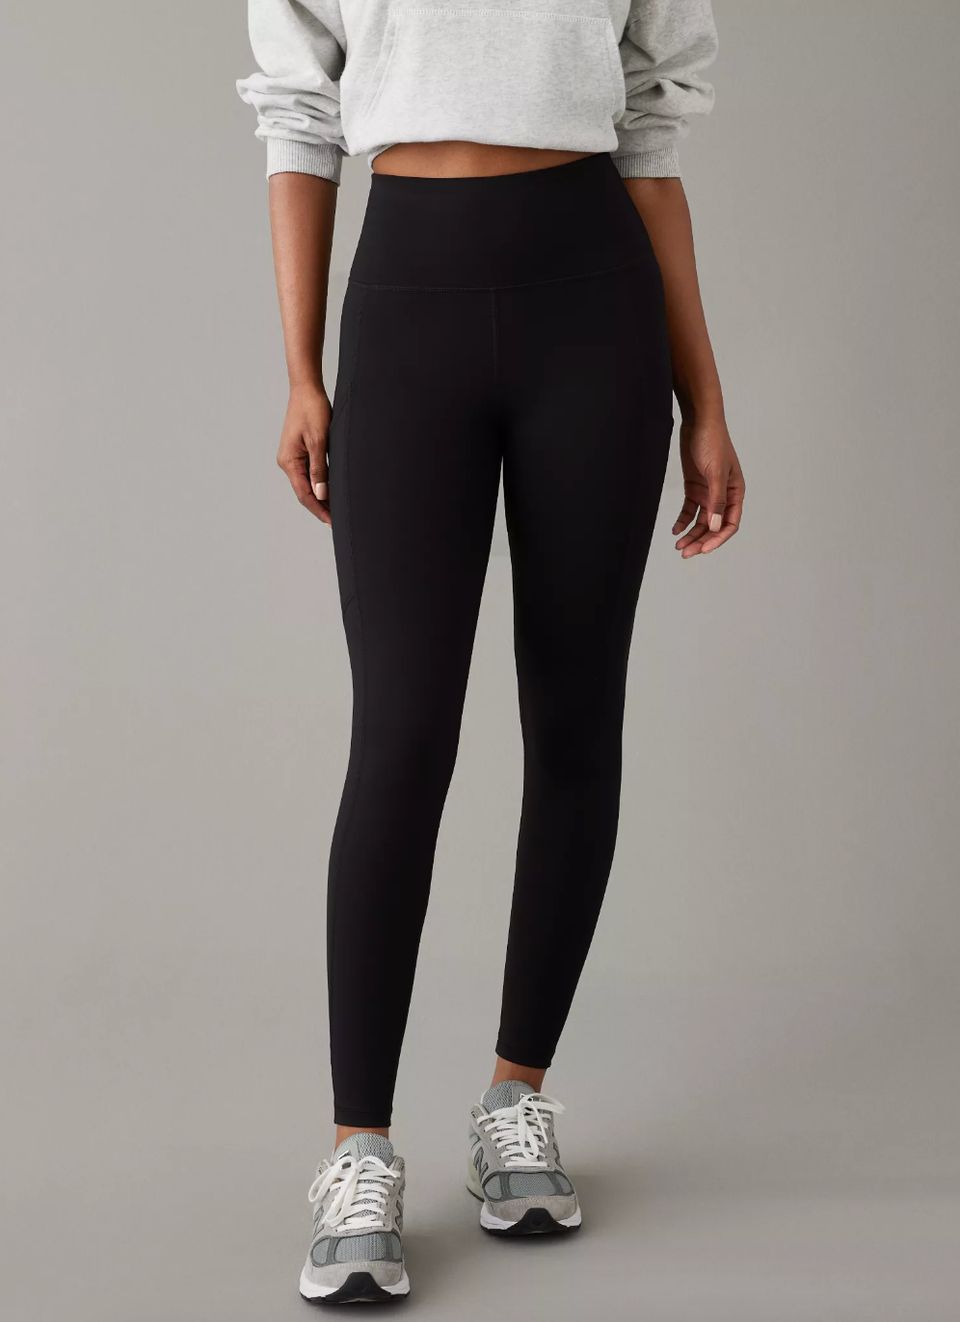 shoppers are obsessed by the fleece-lined Satina leggings - now  reduced to less than $15